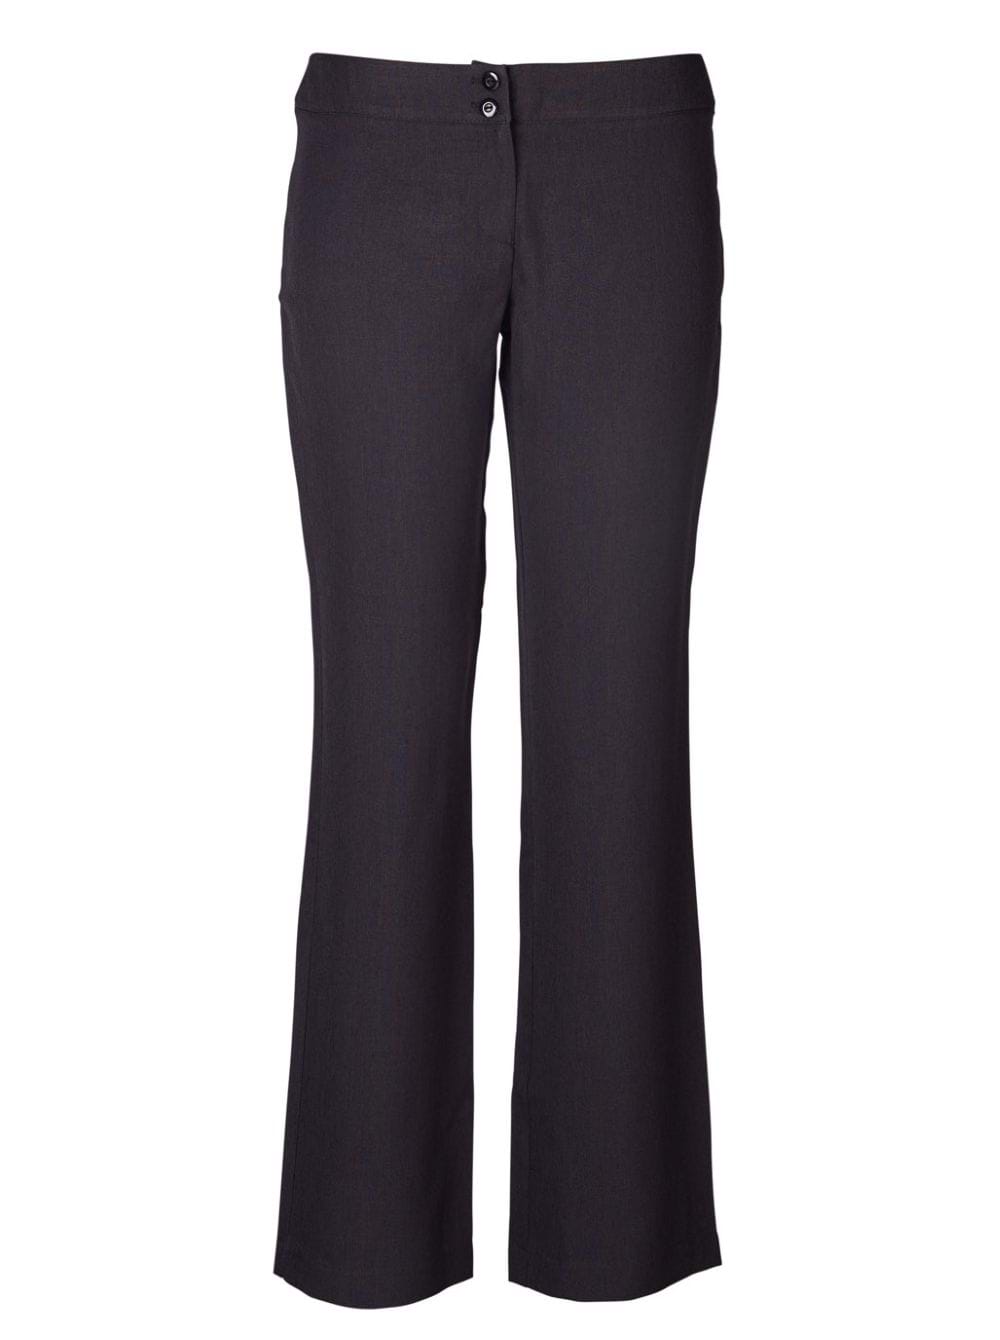 Susan Hipster Pants - Cationic Charcoal Grey / 34